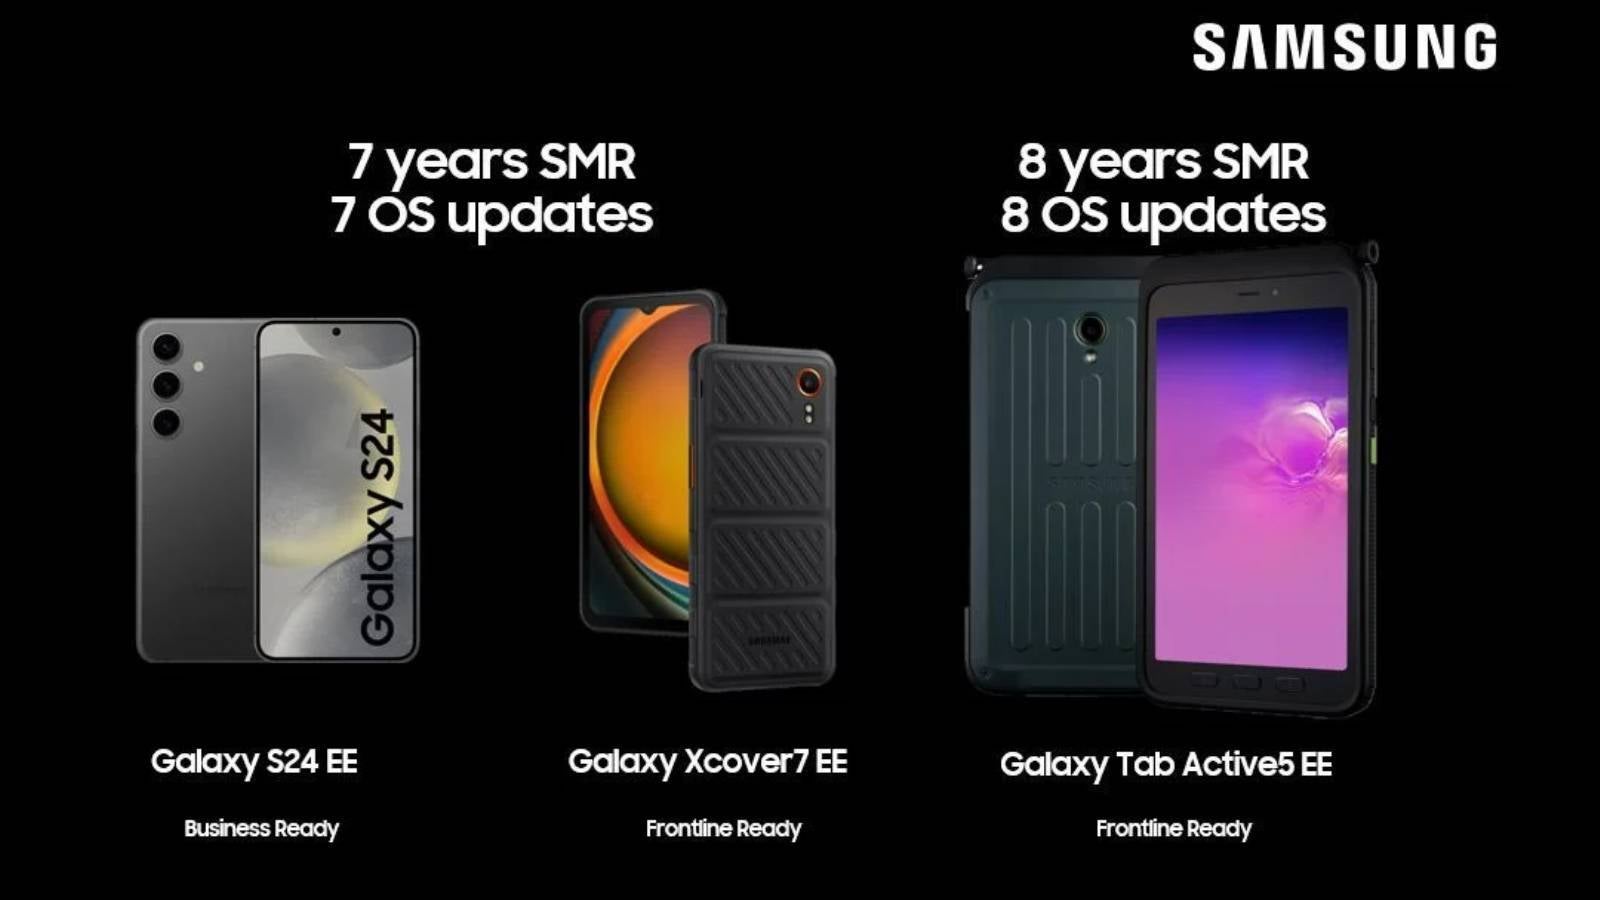 A deleted LinkedIn post from a Samsung executive indicated that the enterprise edition of the Galaxy Tab Active 5 would be supported for eight years - Samsung's new tablet promised more updates than the Galaxy S24 in a now-deleted post.